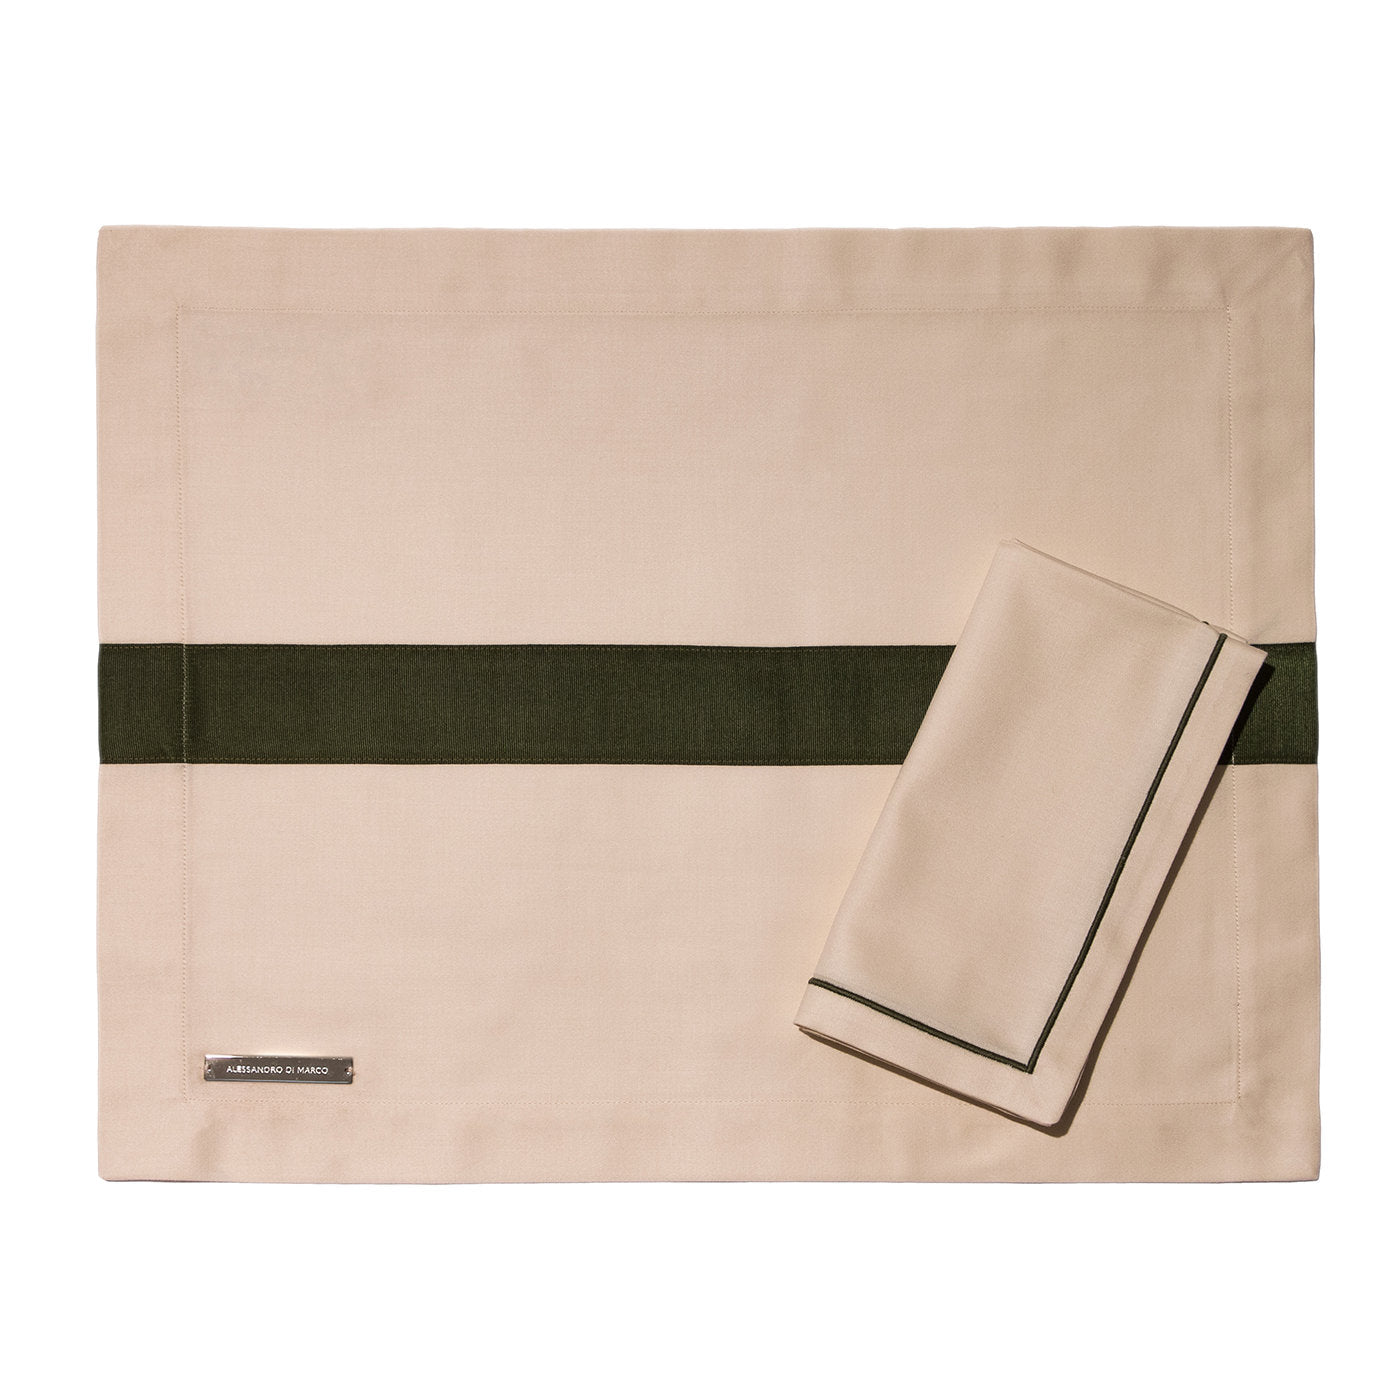 Placemats and Napkins - Beige and Mud Green - Alternative view 1